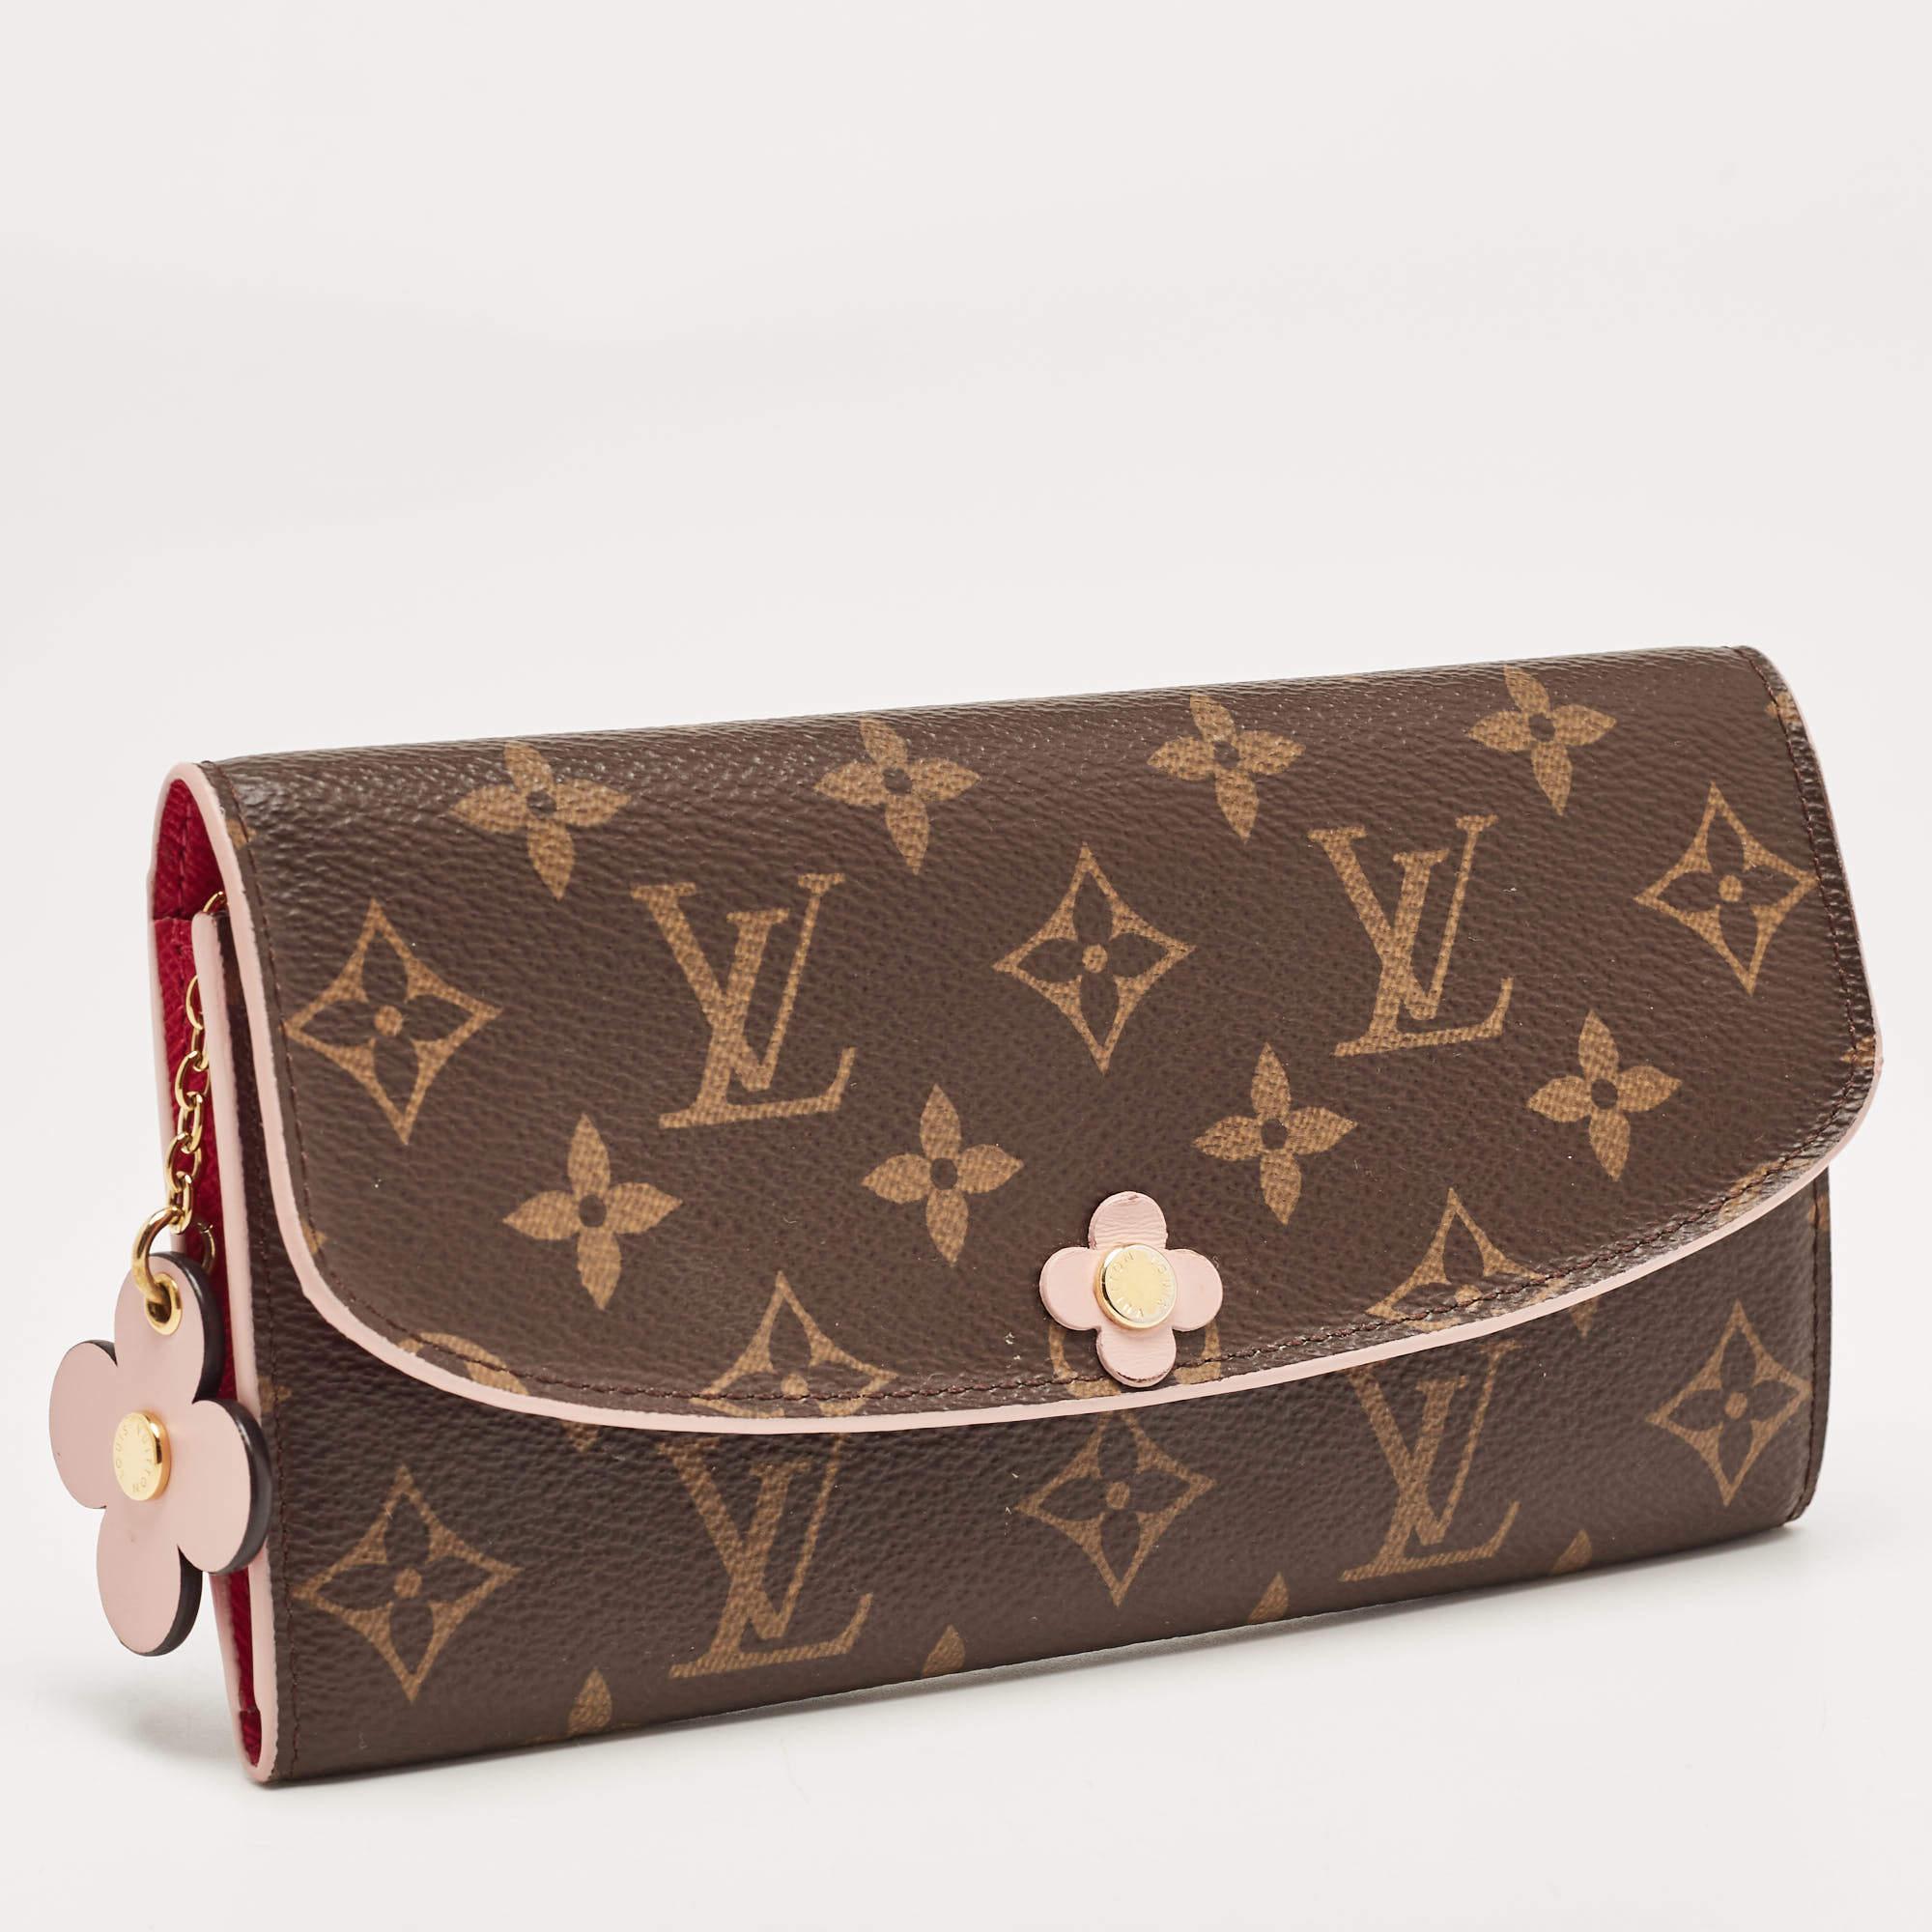 To store all your currencies and cards safely, this Emilie wallet from the House of Louis Vuitton is the best accessory to trust. It is created using Monogram canvas and opens to a leather-lined interior, which consists of neat storage compartments.